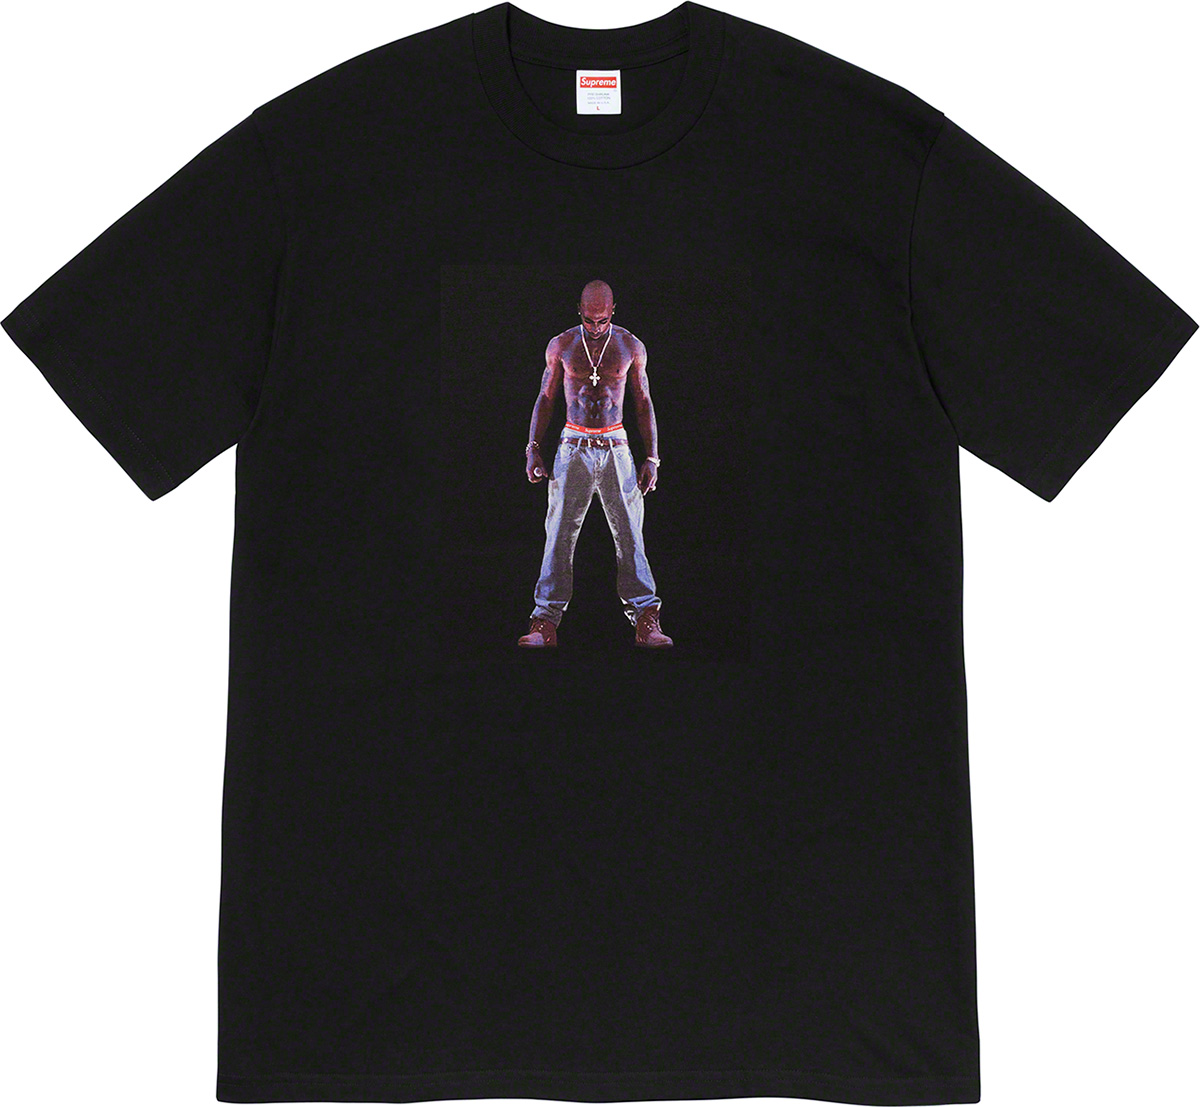 Supreme Spring/Summer 2020 Drop Features Tupac Hologram: Release 